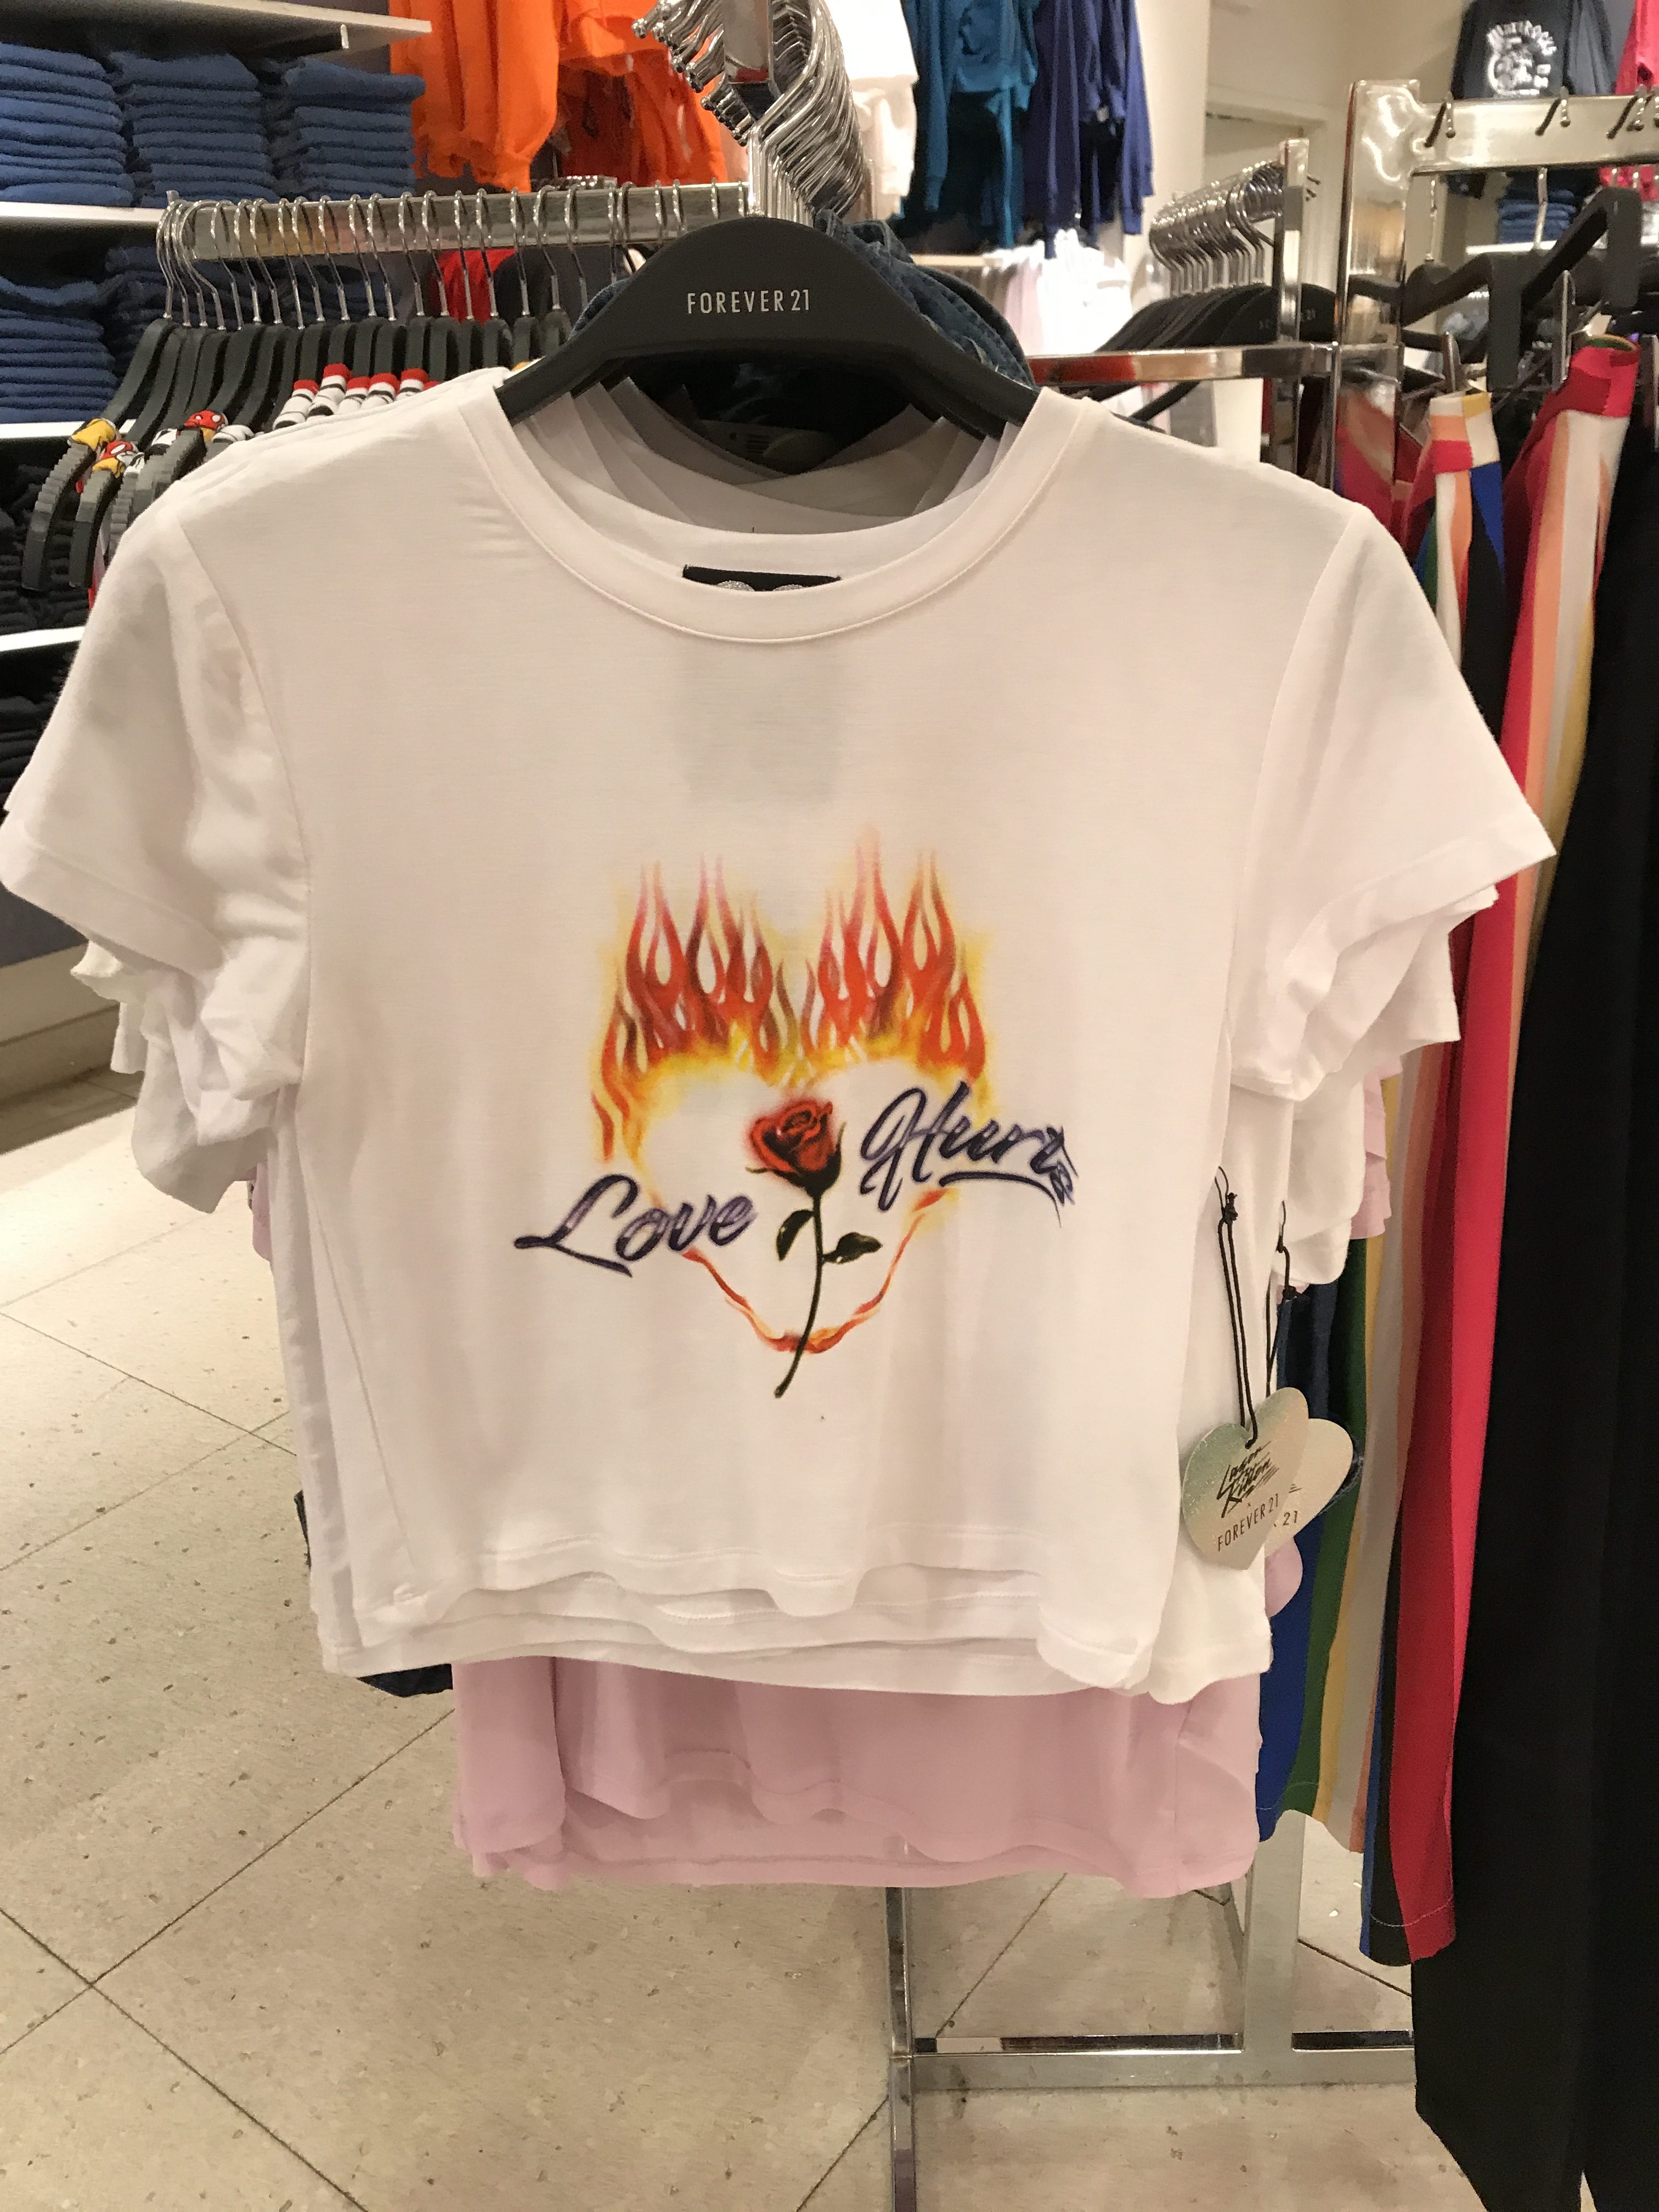 Store Excursion: Forever 21